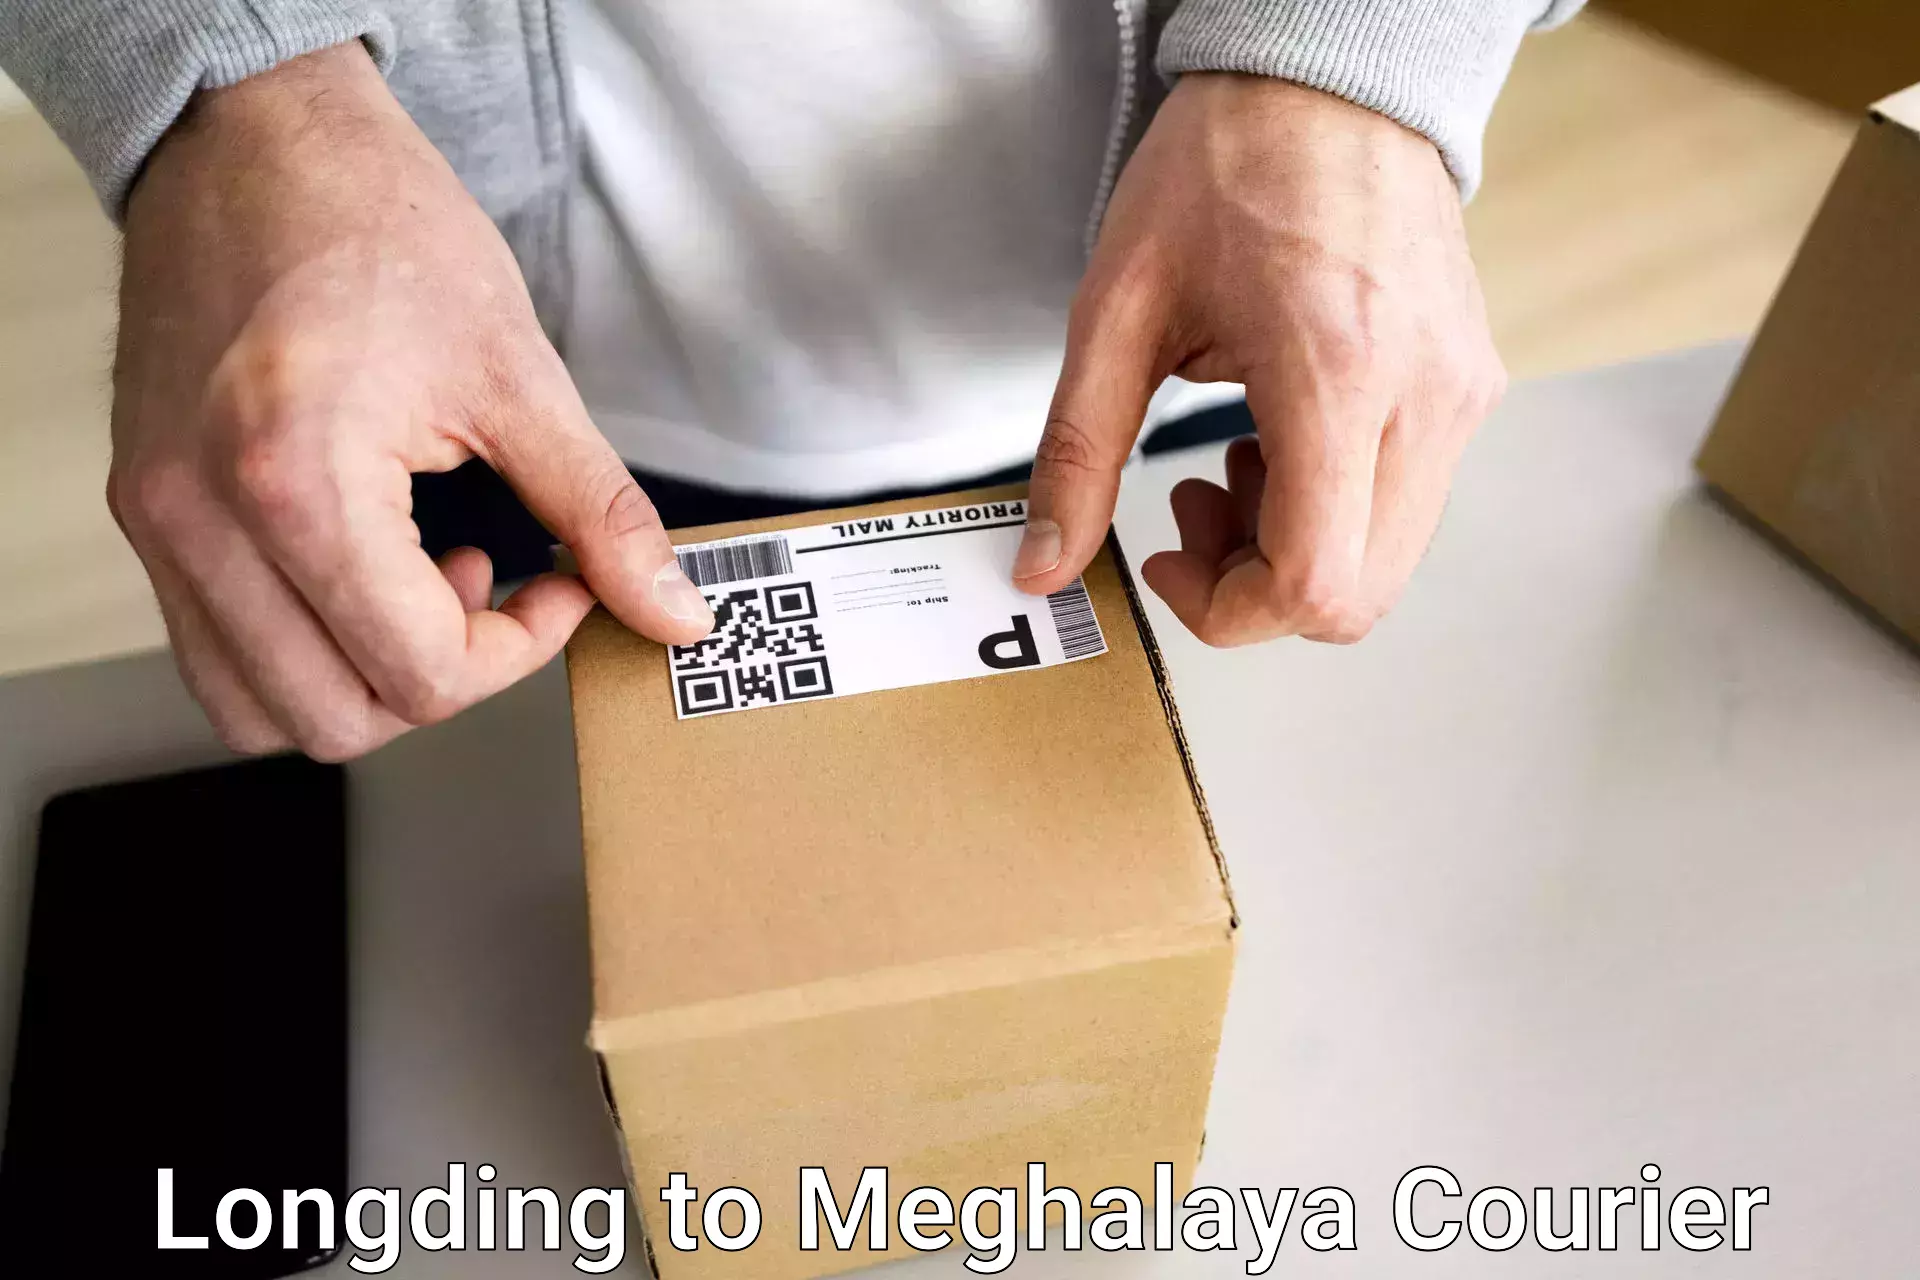 Luggage delivery app Longding to Jowai